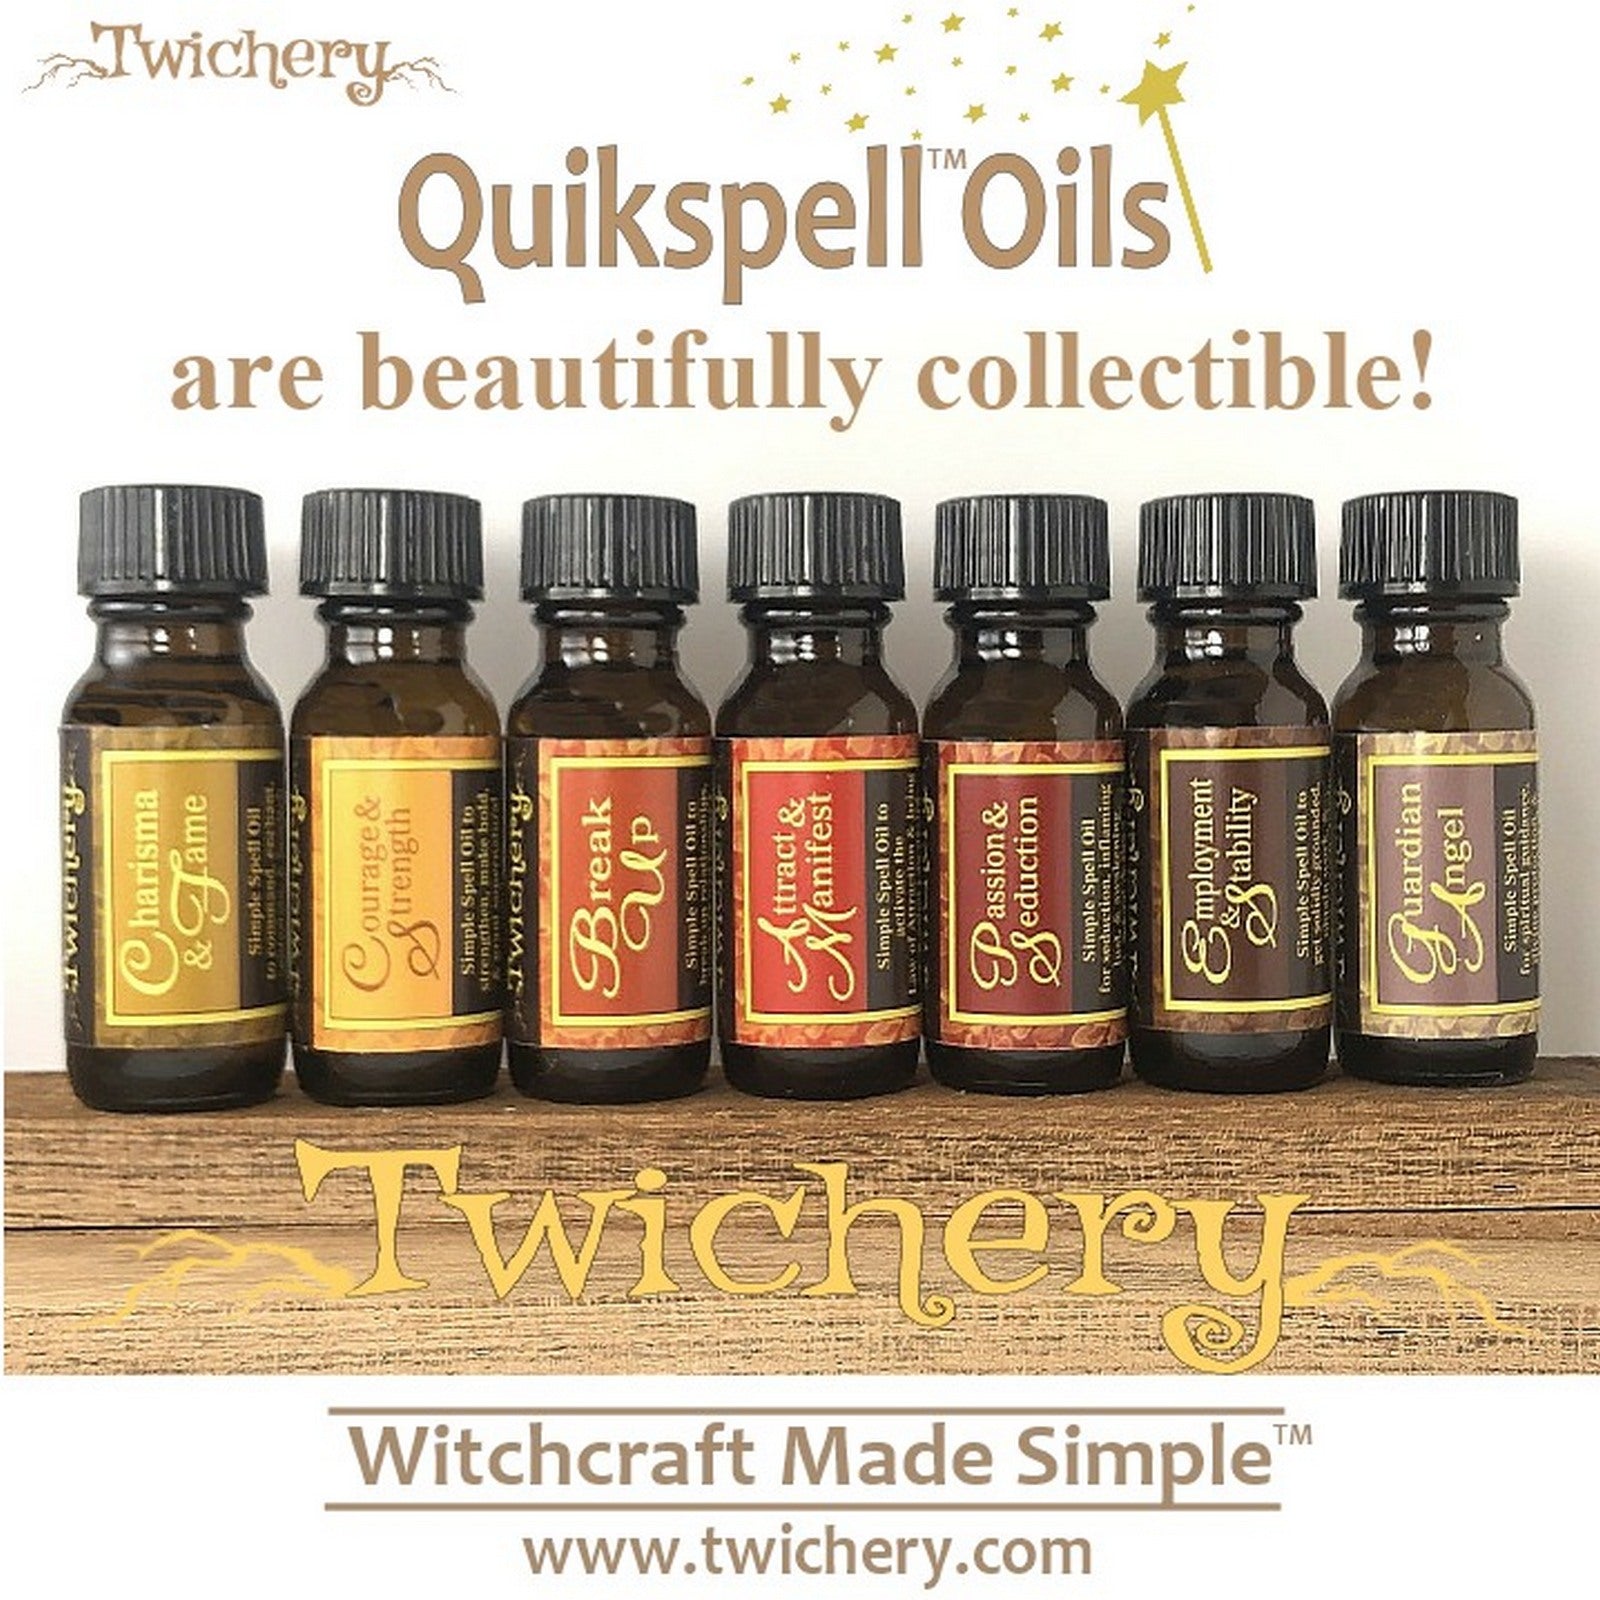 Collect all 24 Twichery Quikspell Oils for all your magickal needs, including Wisdom Beyond Your Years! Hoodoo, Voodoo, Wicca, Witchcraft Made Simple